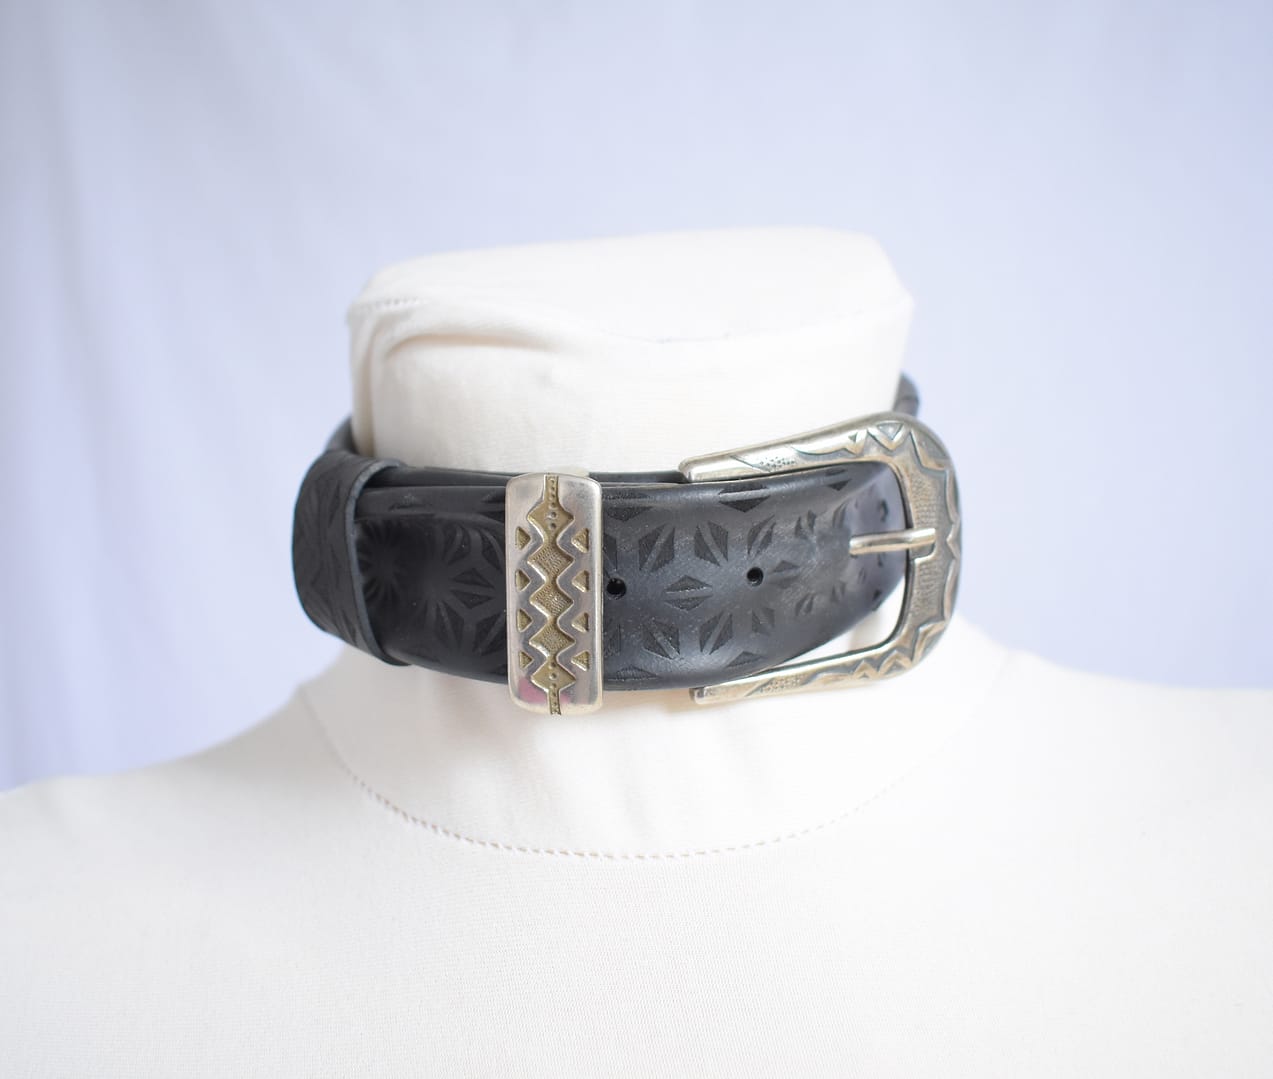 Recyled Jewellery: A black leather Belt Choker with a large, ornate silver buckle rests around the neck of a white mannequin. The Belt Choker features embossed geometric patterns, adding texture to its design, resembling the intricate details of a finely crafted belt. The background is plain and light-colored. @ Reblack Shop